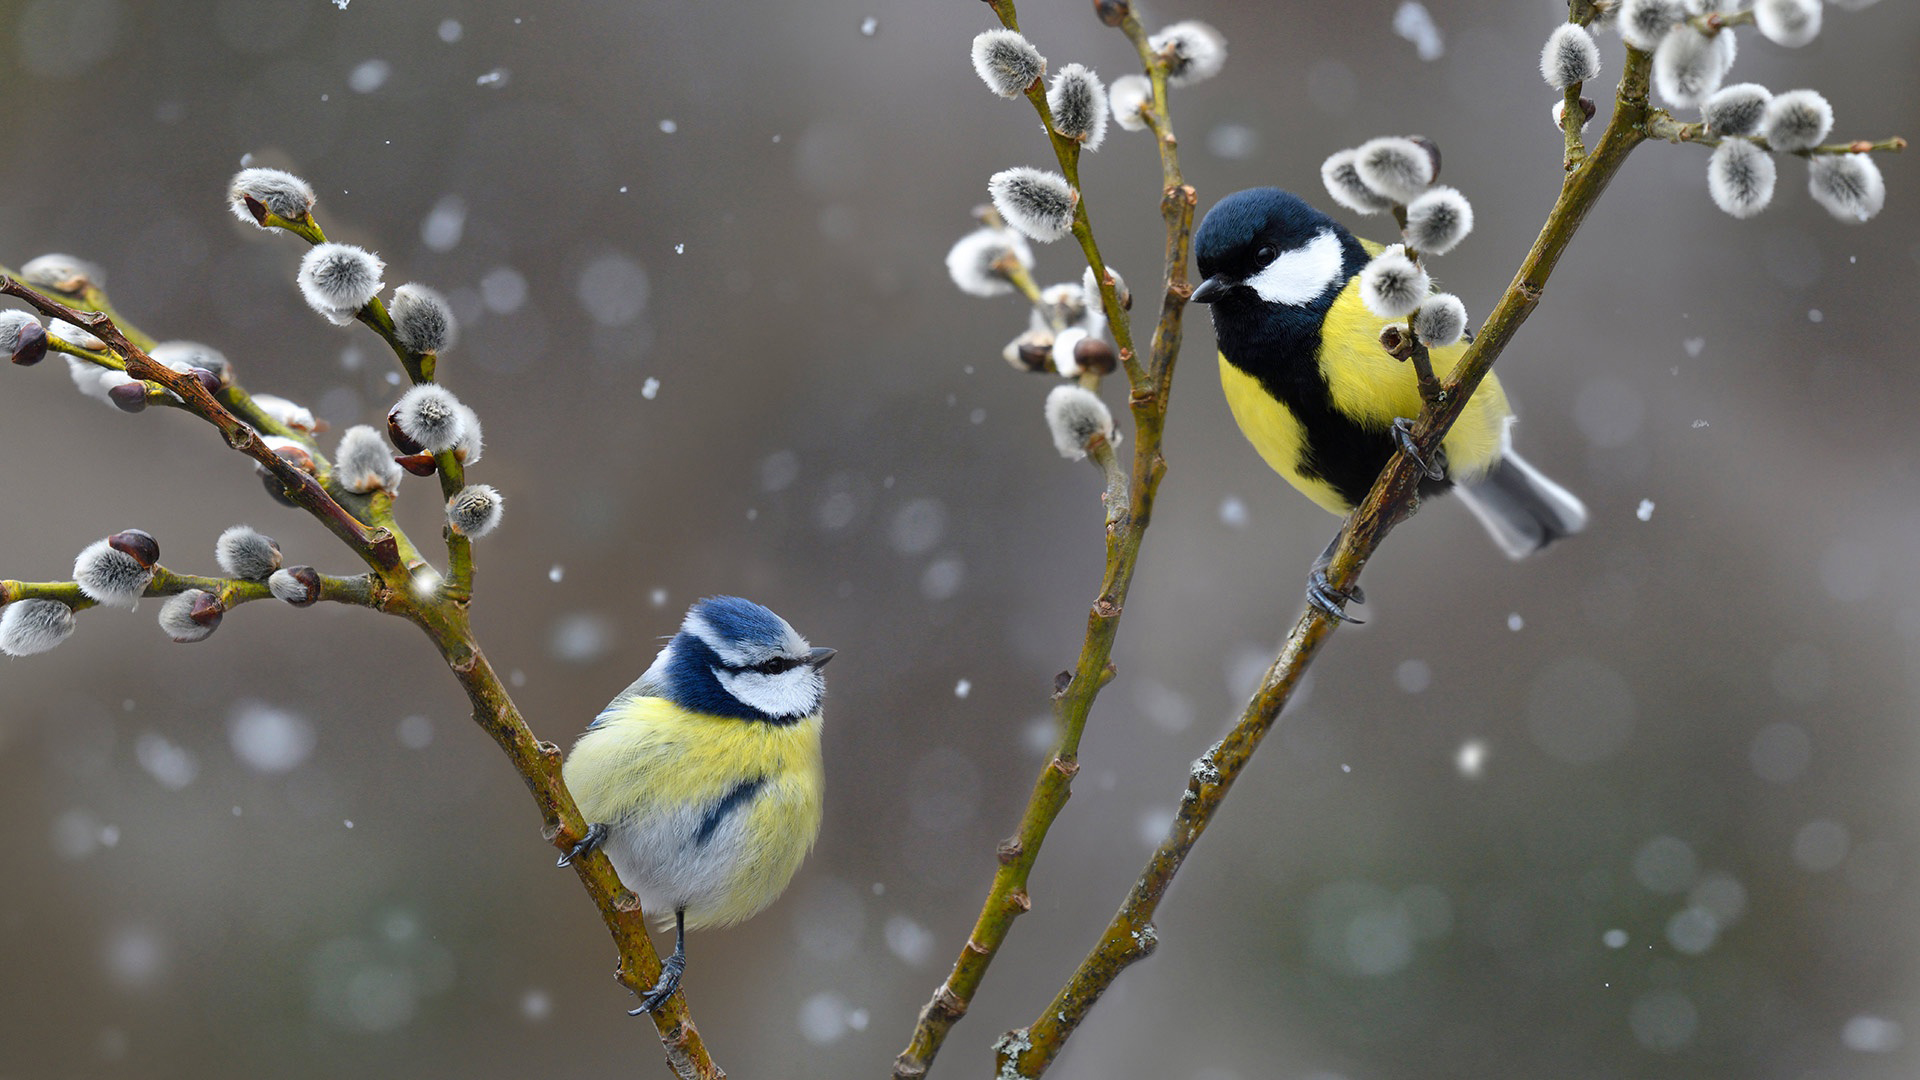 Yellow Blue White Titmouse Birds Are Standing On Tree Branches In Snowfall Wallpaper HD Birds